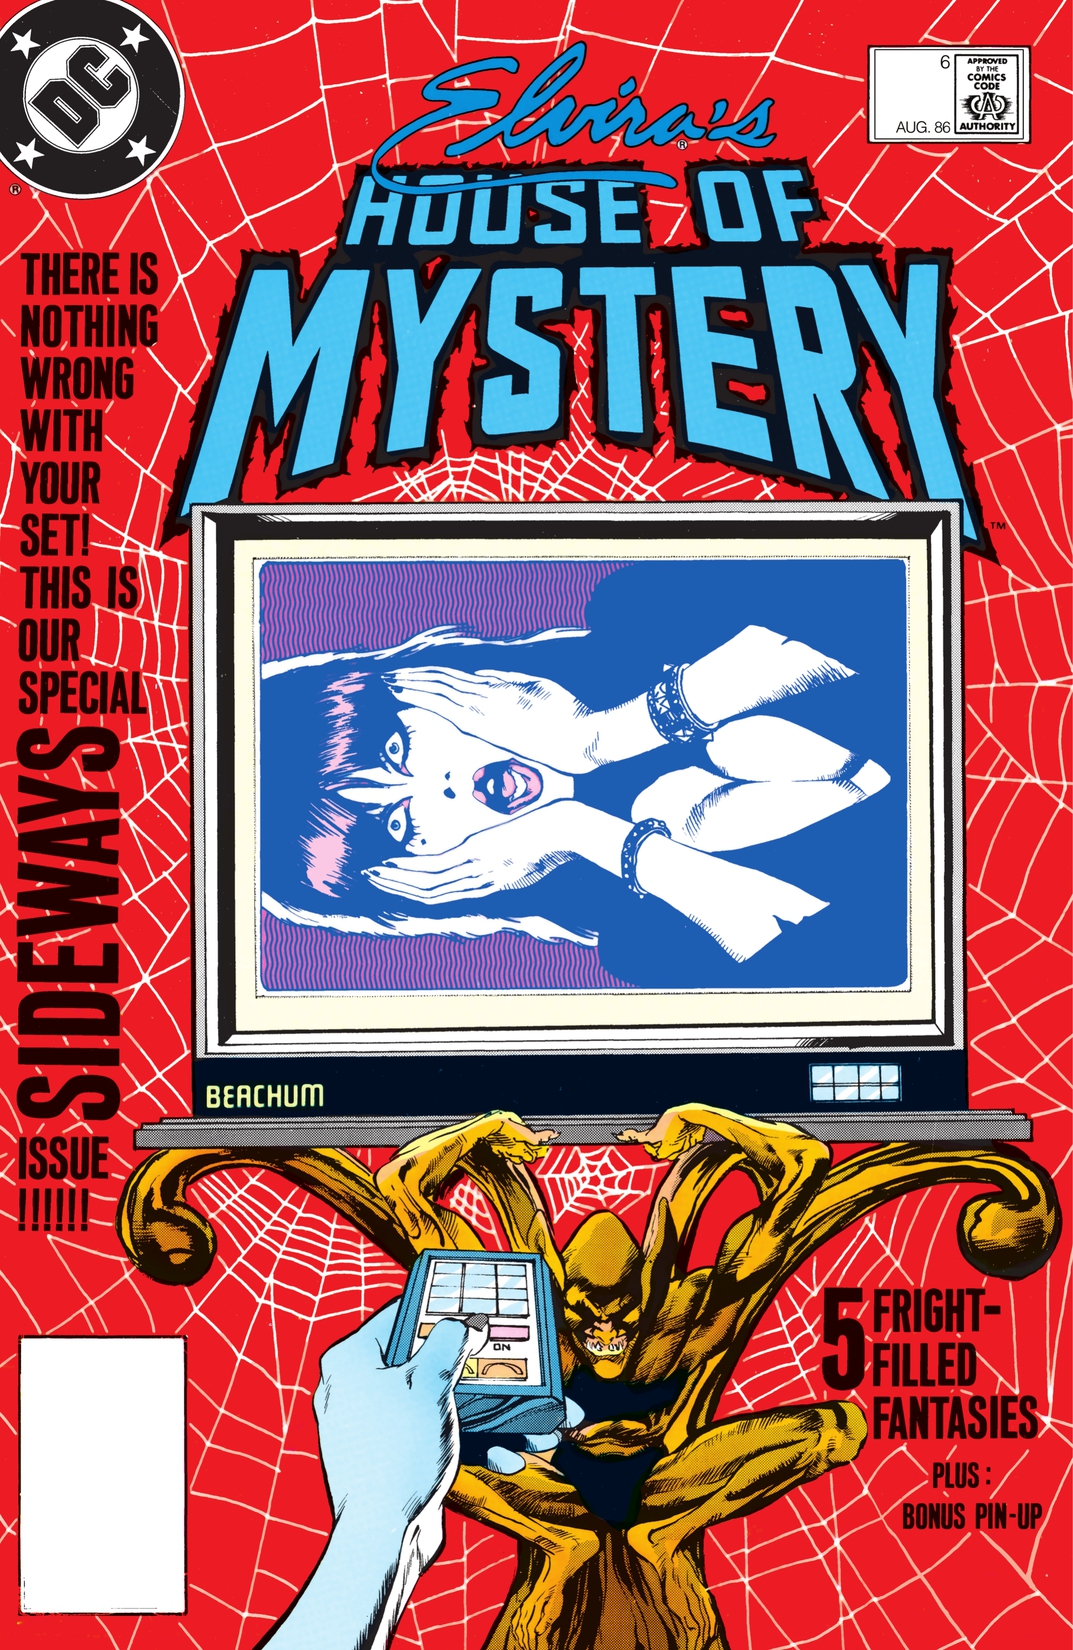 Elvira's House of Mystery #6 preview images